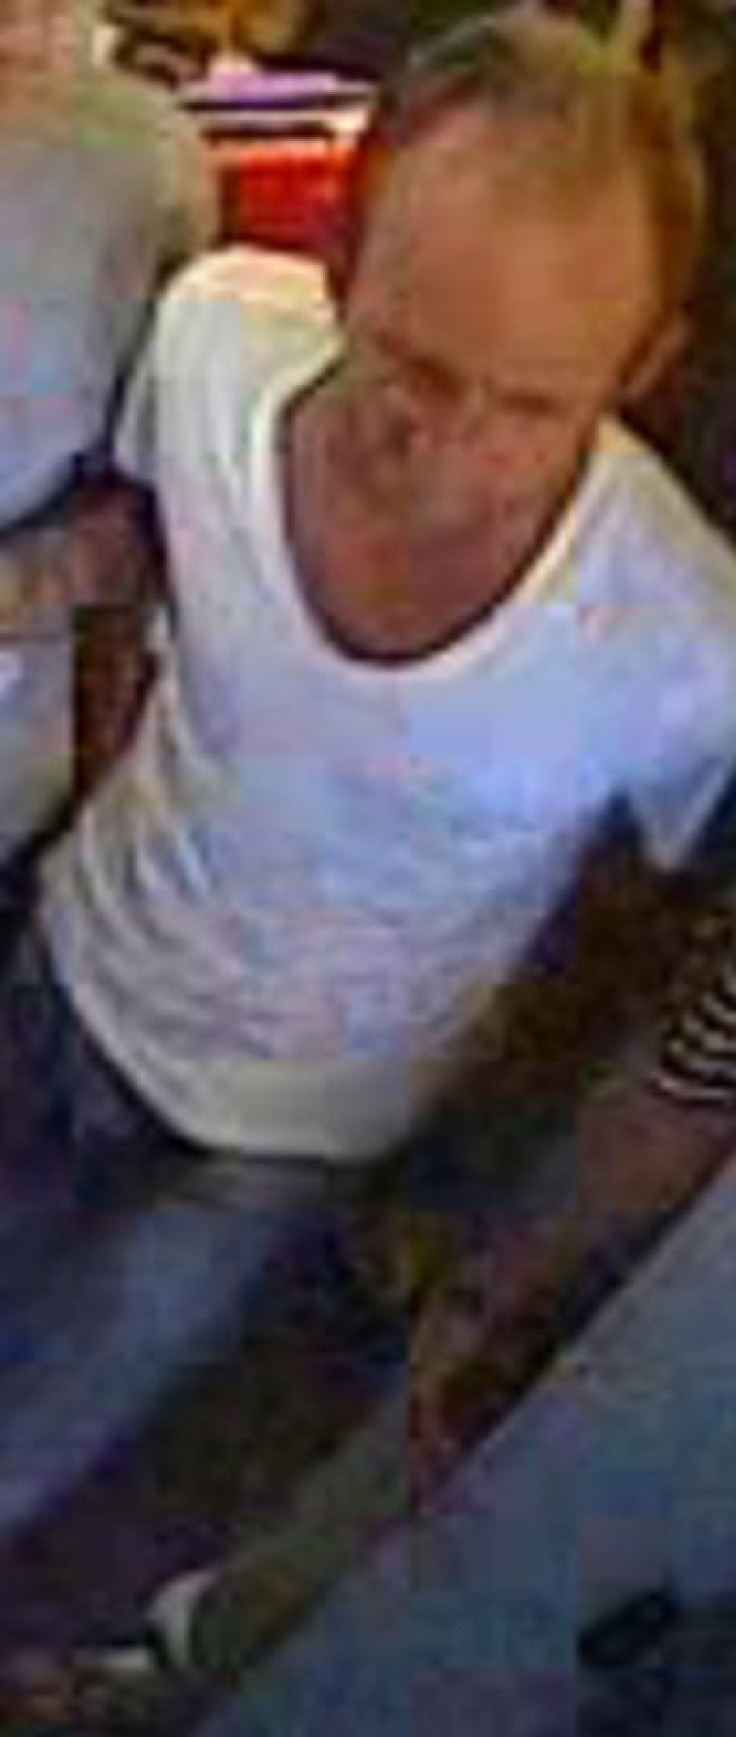 Police release pix of man